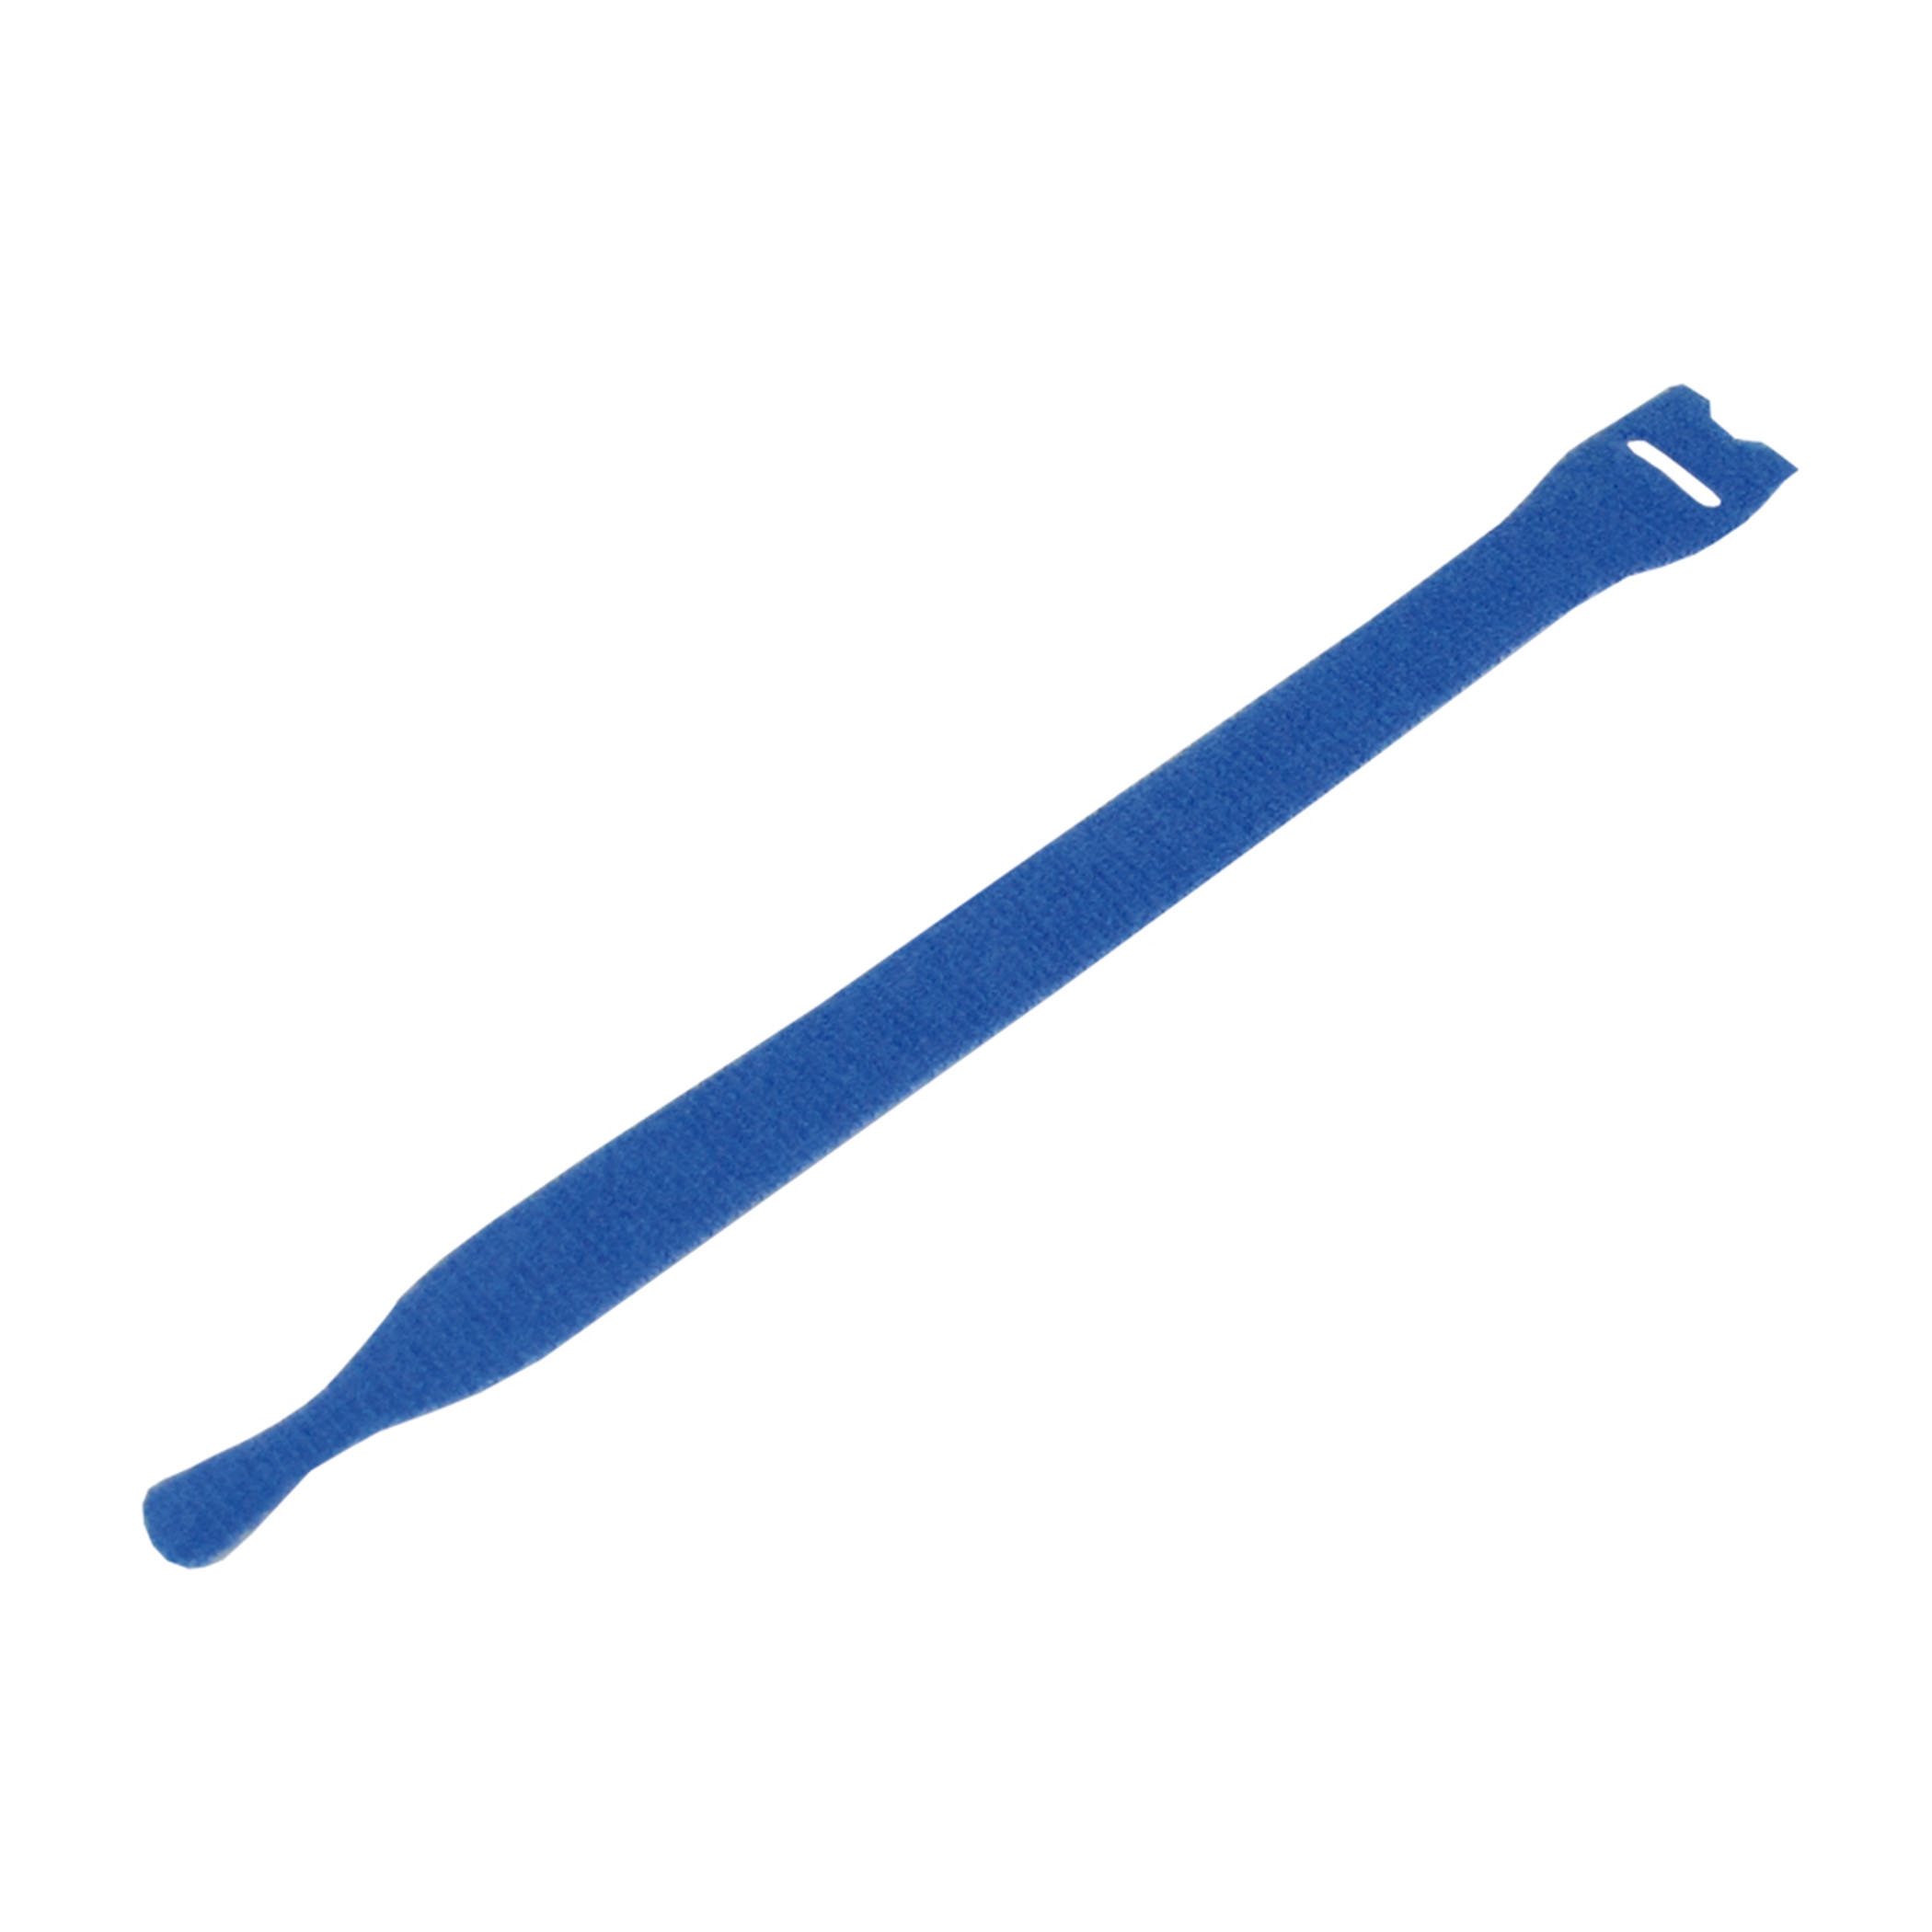 Cable Tie Blue - t1513-300bh